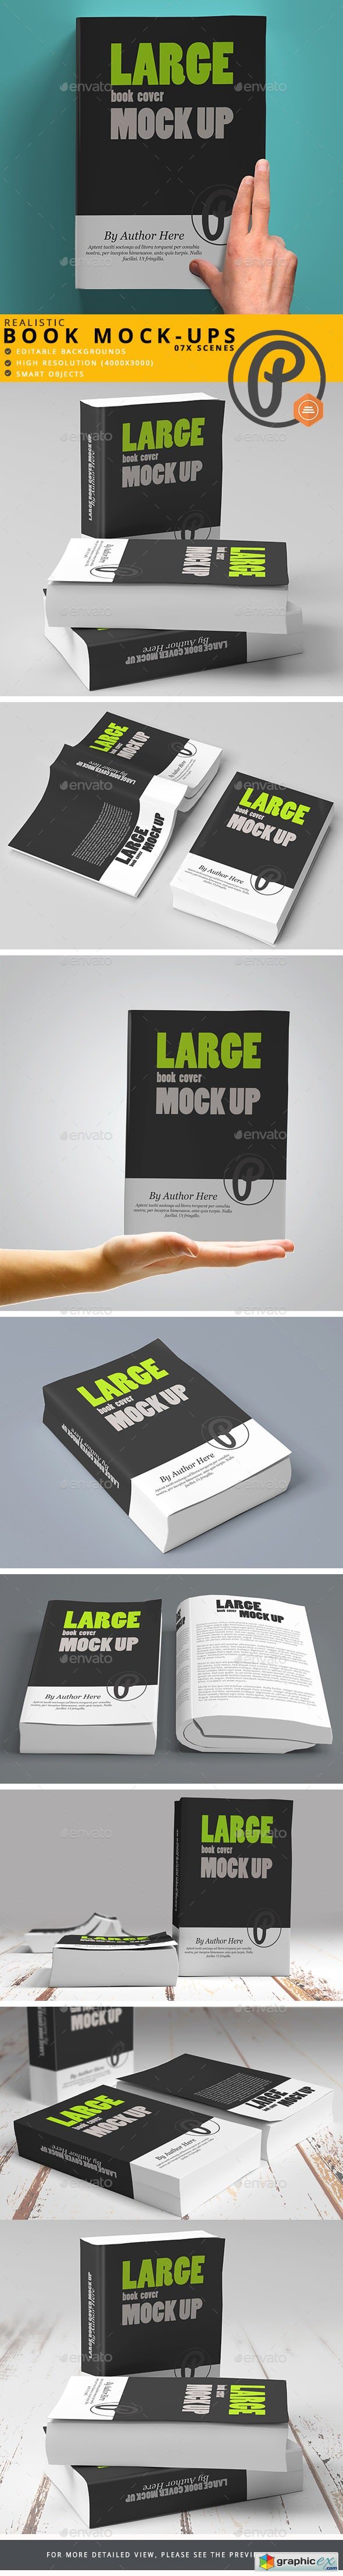 Softcover Large Book Mock Up